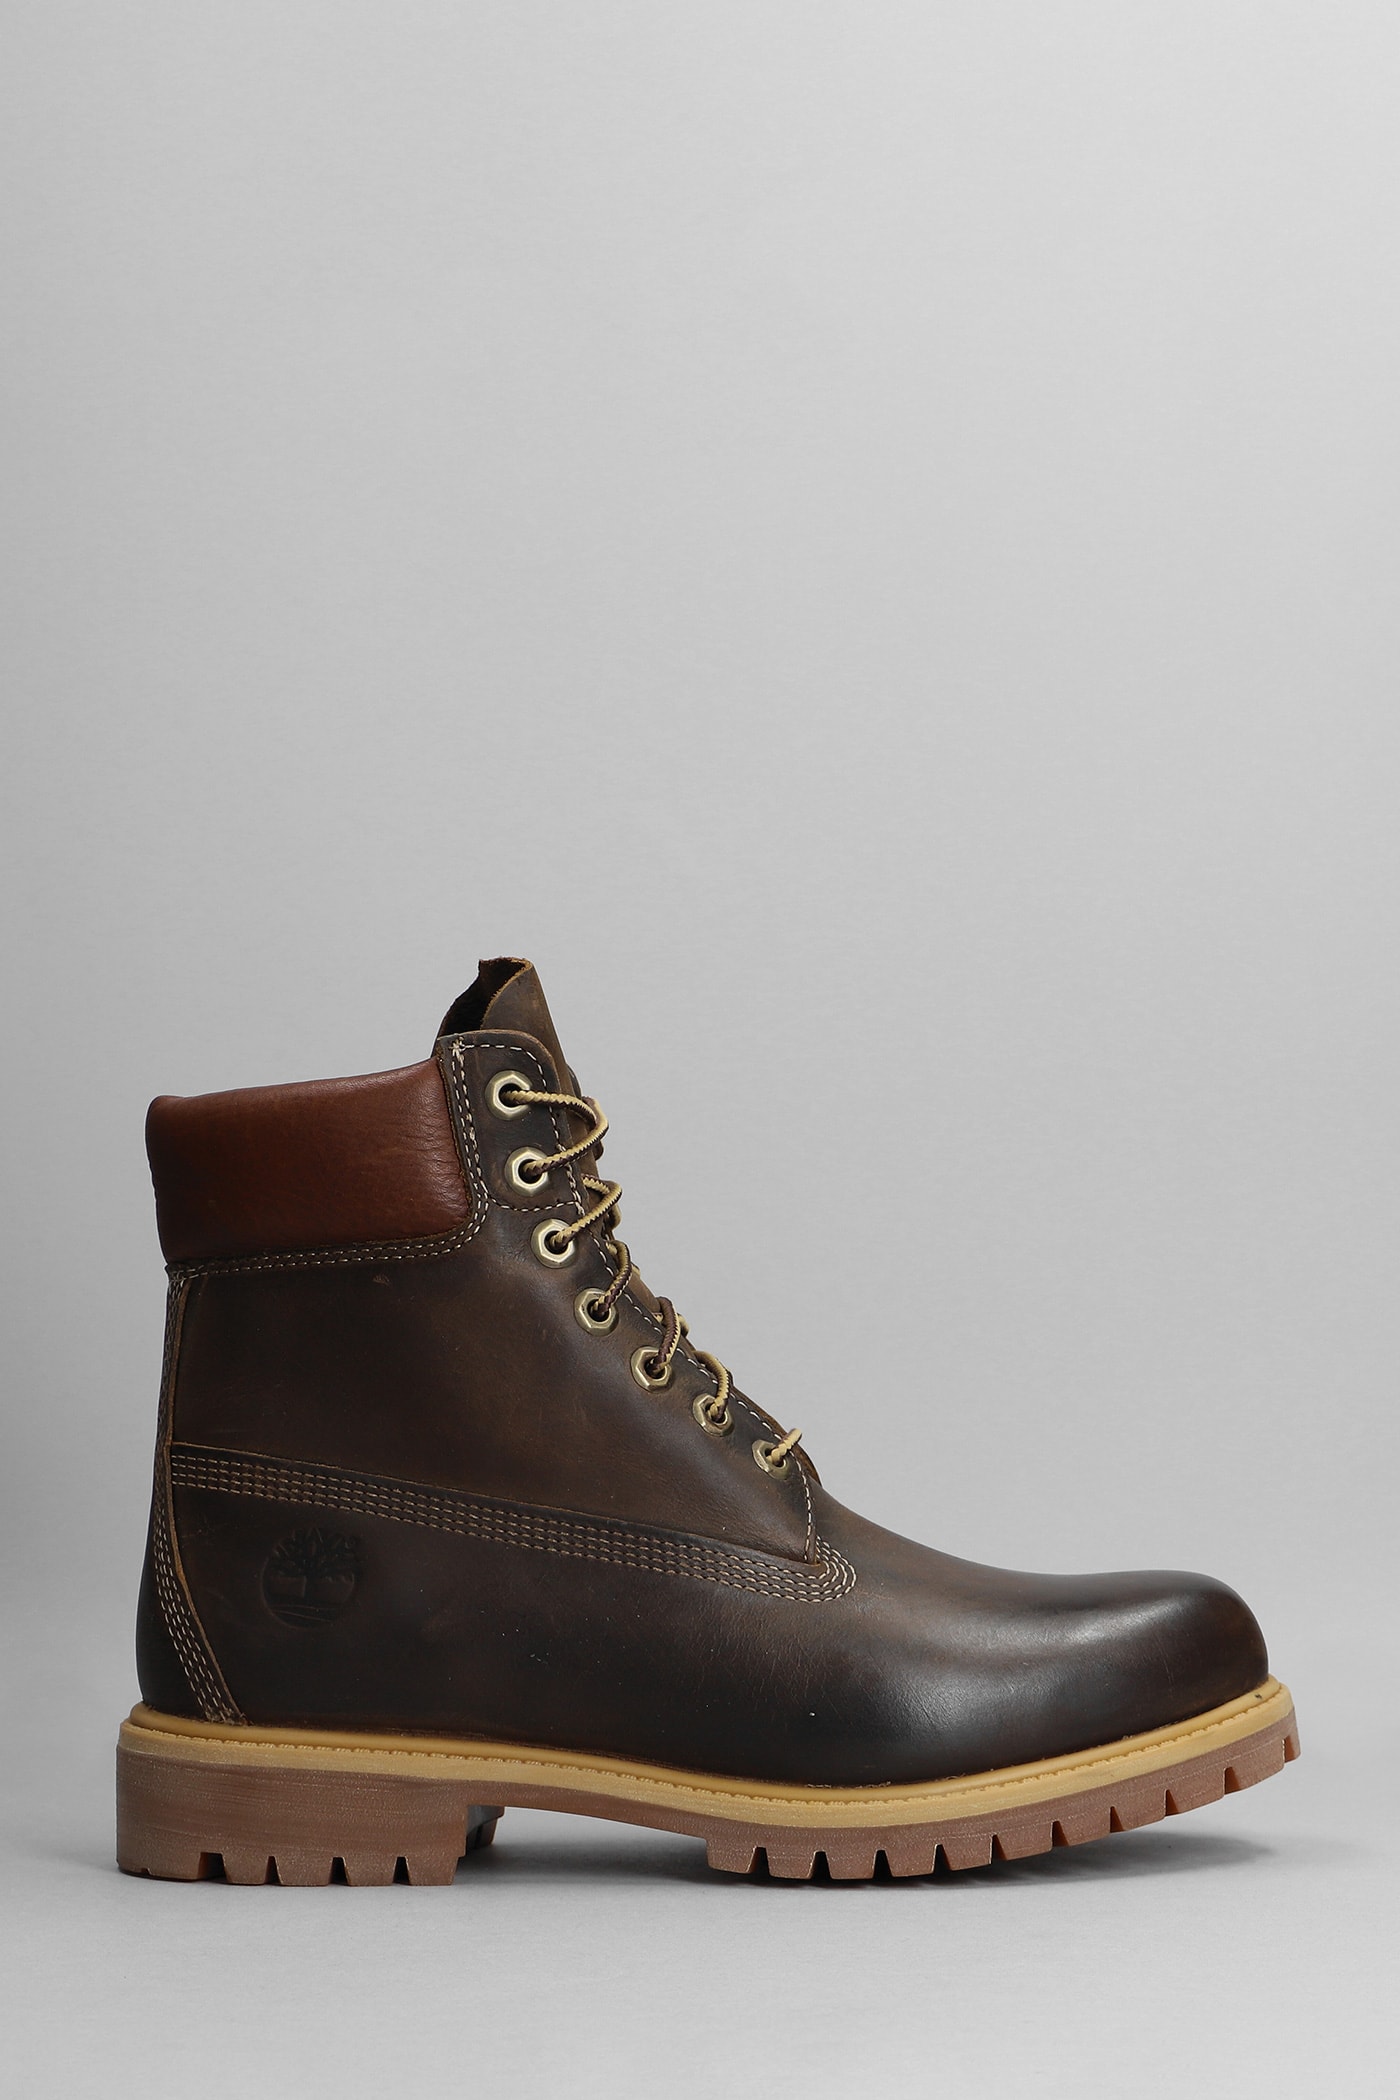 Timberland Heritage 6in Combat Boots In Brown Leather